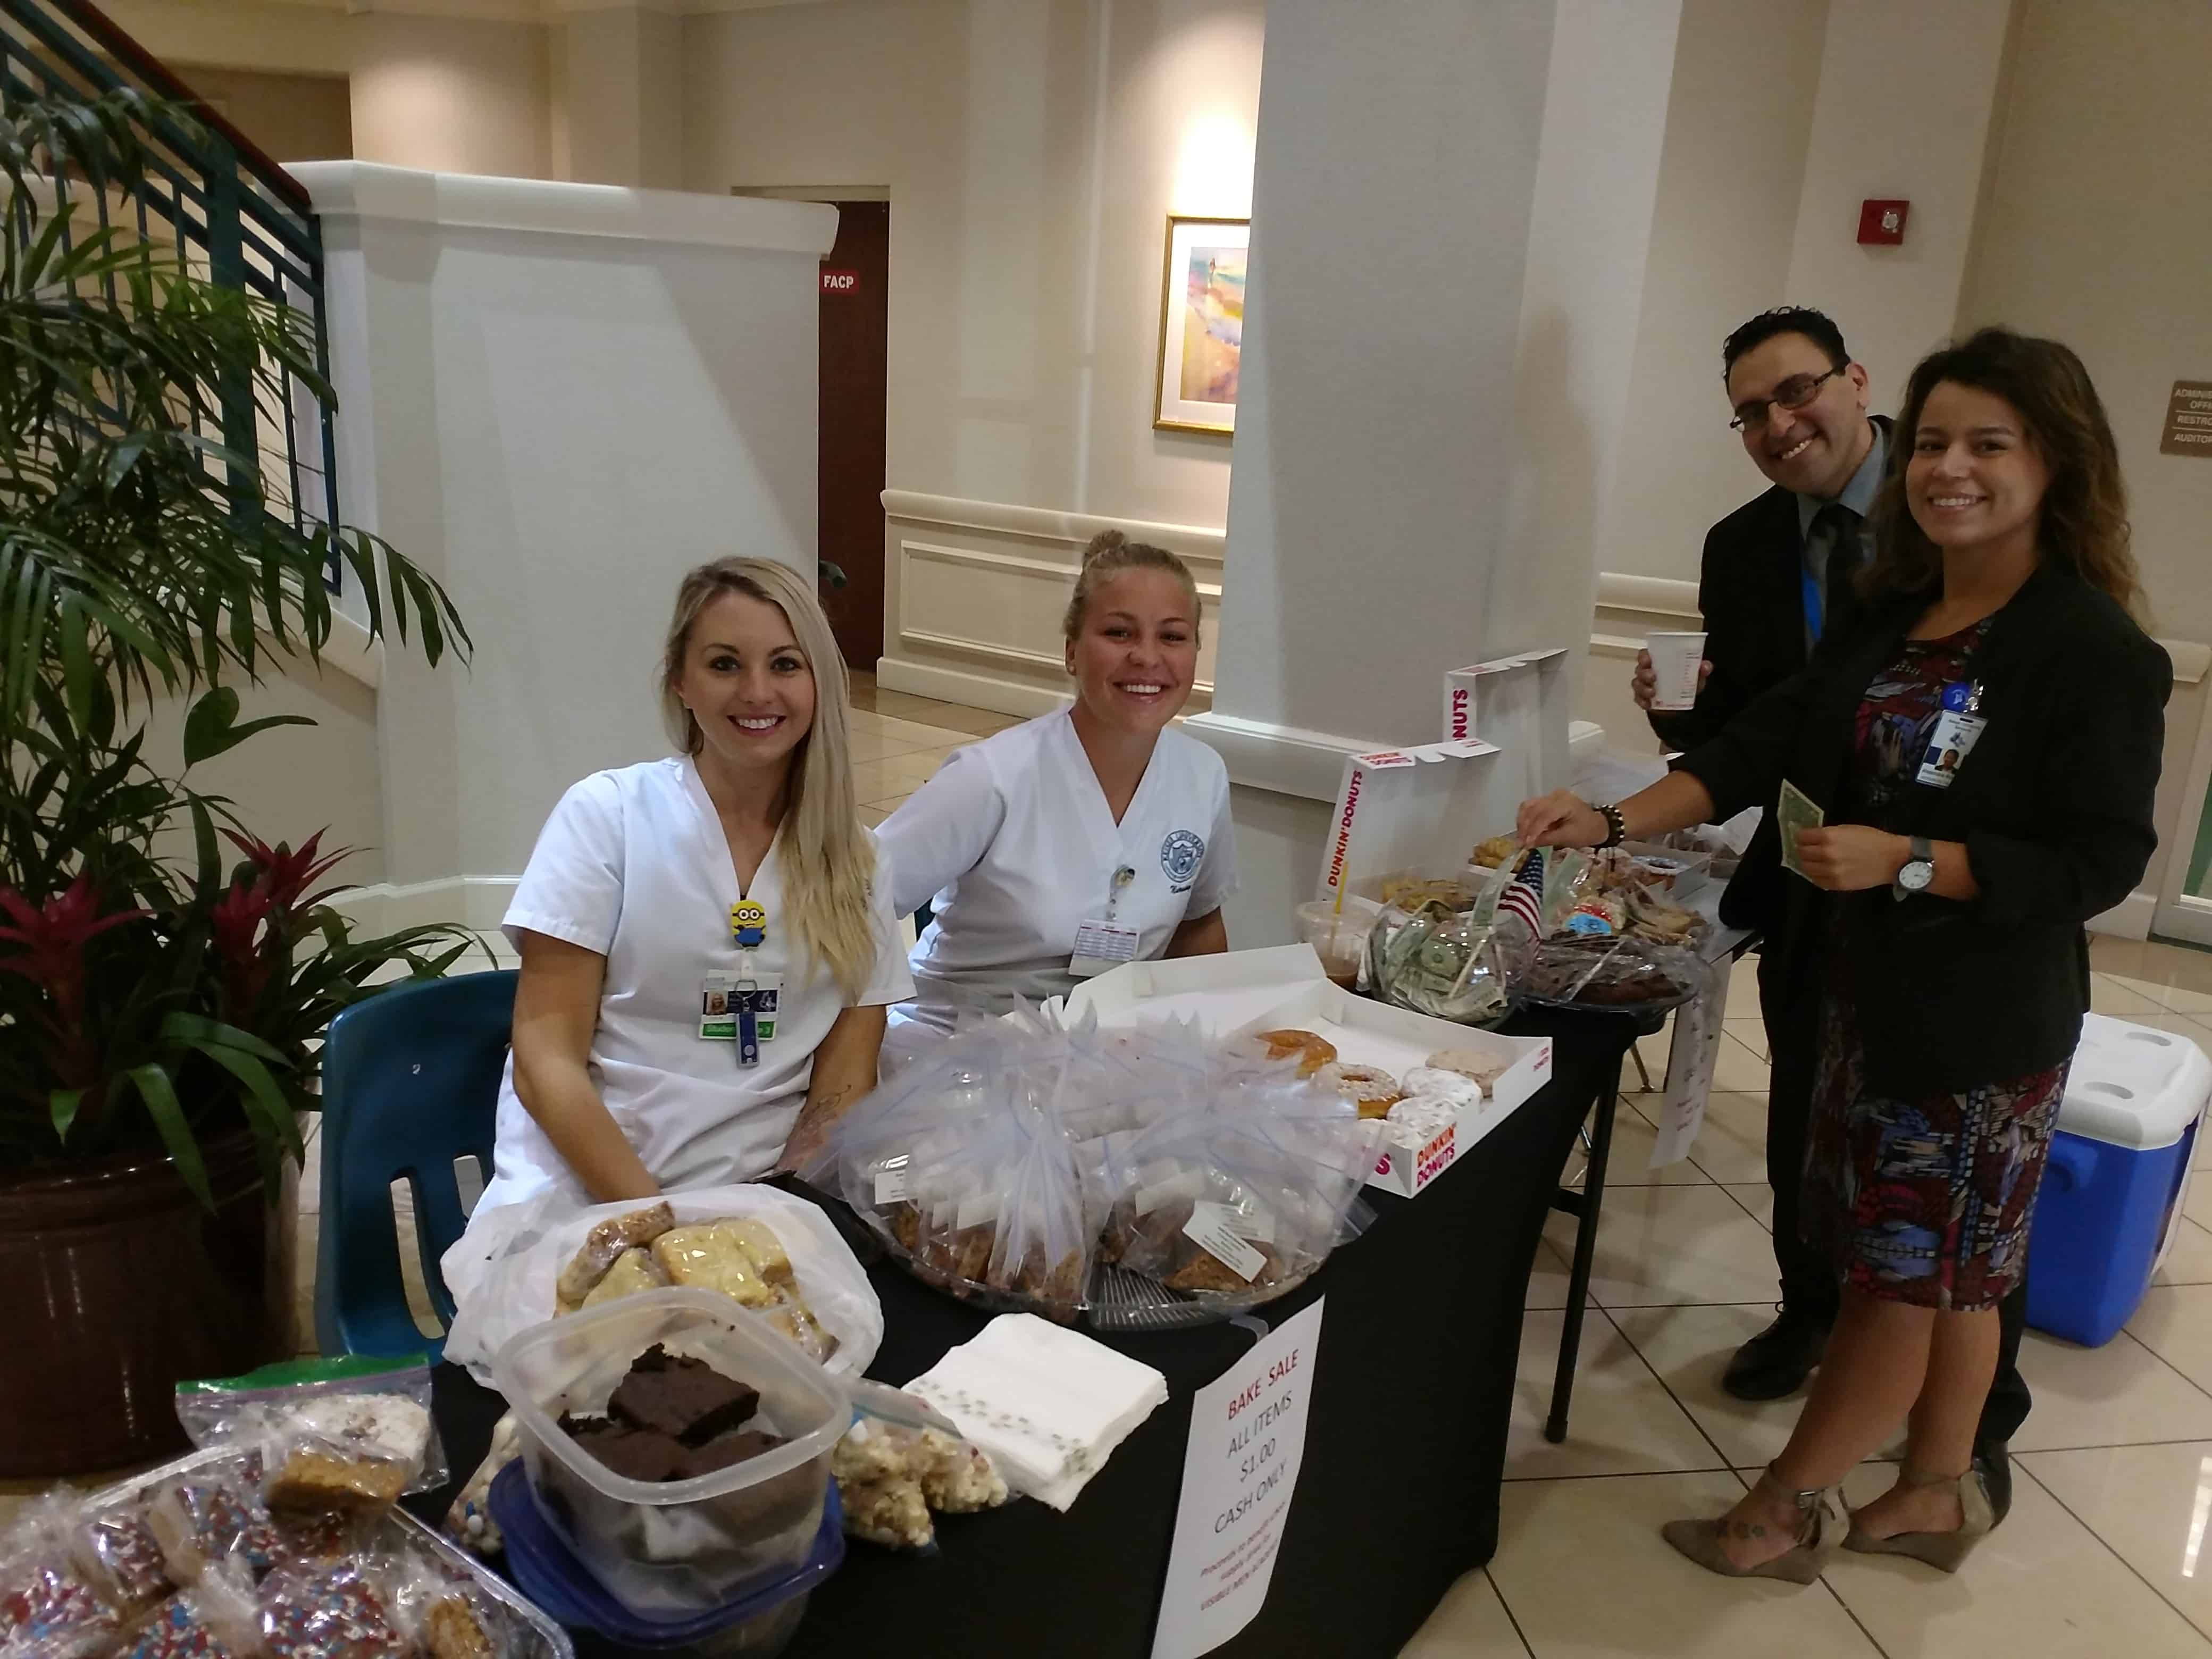 Sarasota Campus Bake Sale Supports School Supply Drive